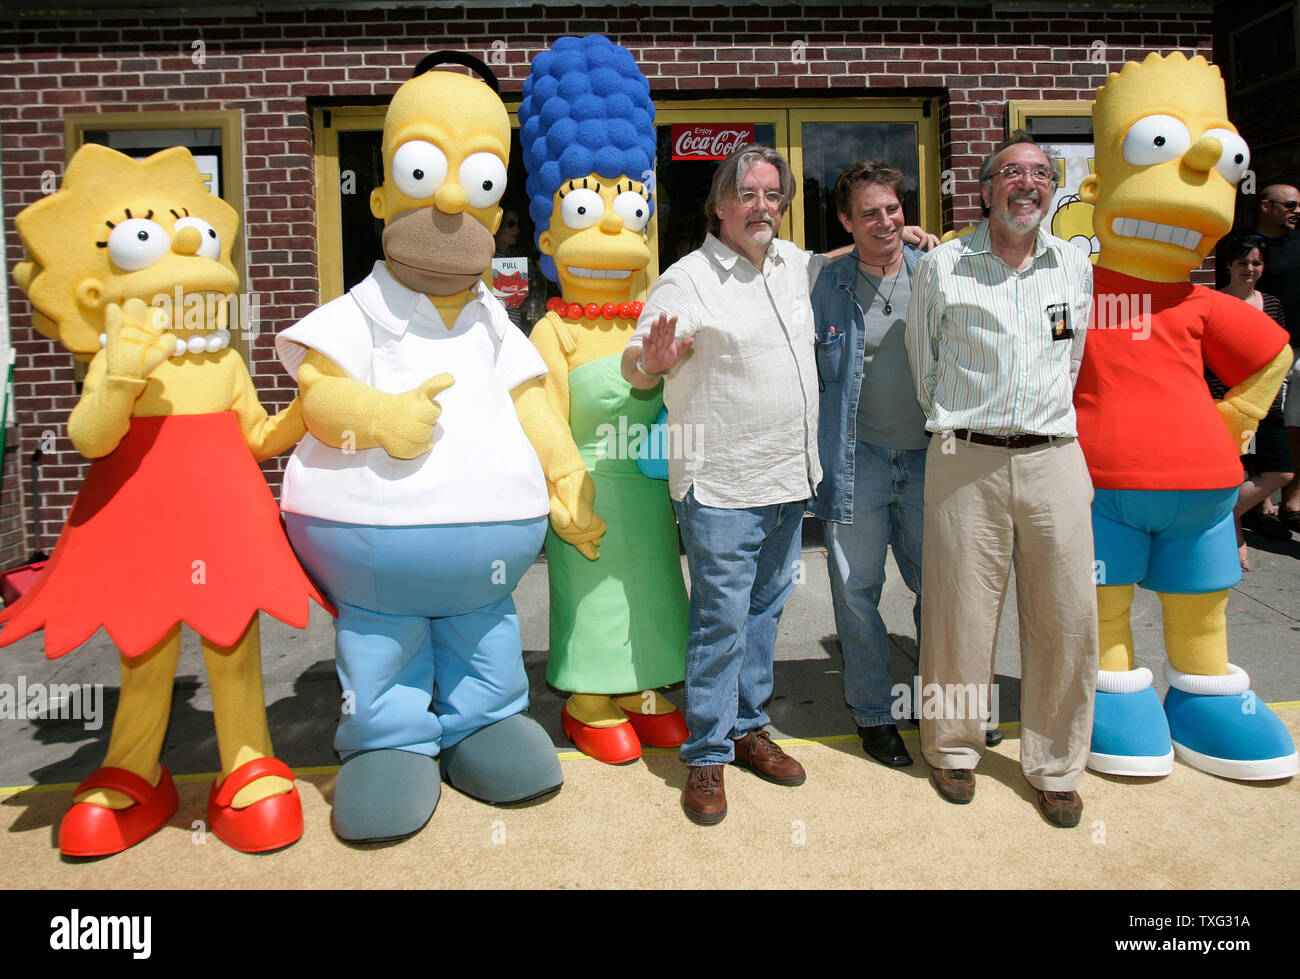 (L-R) Lisa Simpson, Homer Simpson, Marge Simpson, 'The Simpsons Movie' producer Matt Groening, Simpsons director David Silverman, and Simpsons producer James L. Brooks stand for a photo at the hometown premiere of 'The Simpsons Movie' at the Springfield Movie Theater in Springfield, Vermont on July 21, 2007.(UPI Photo/Matthew Healey) Stock Photo